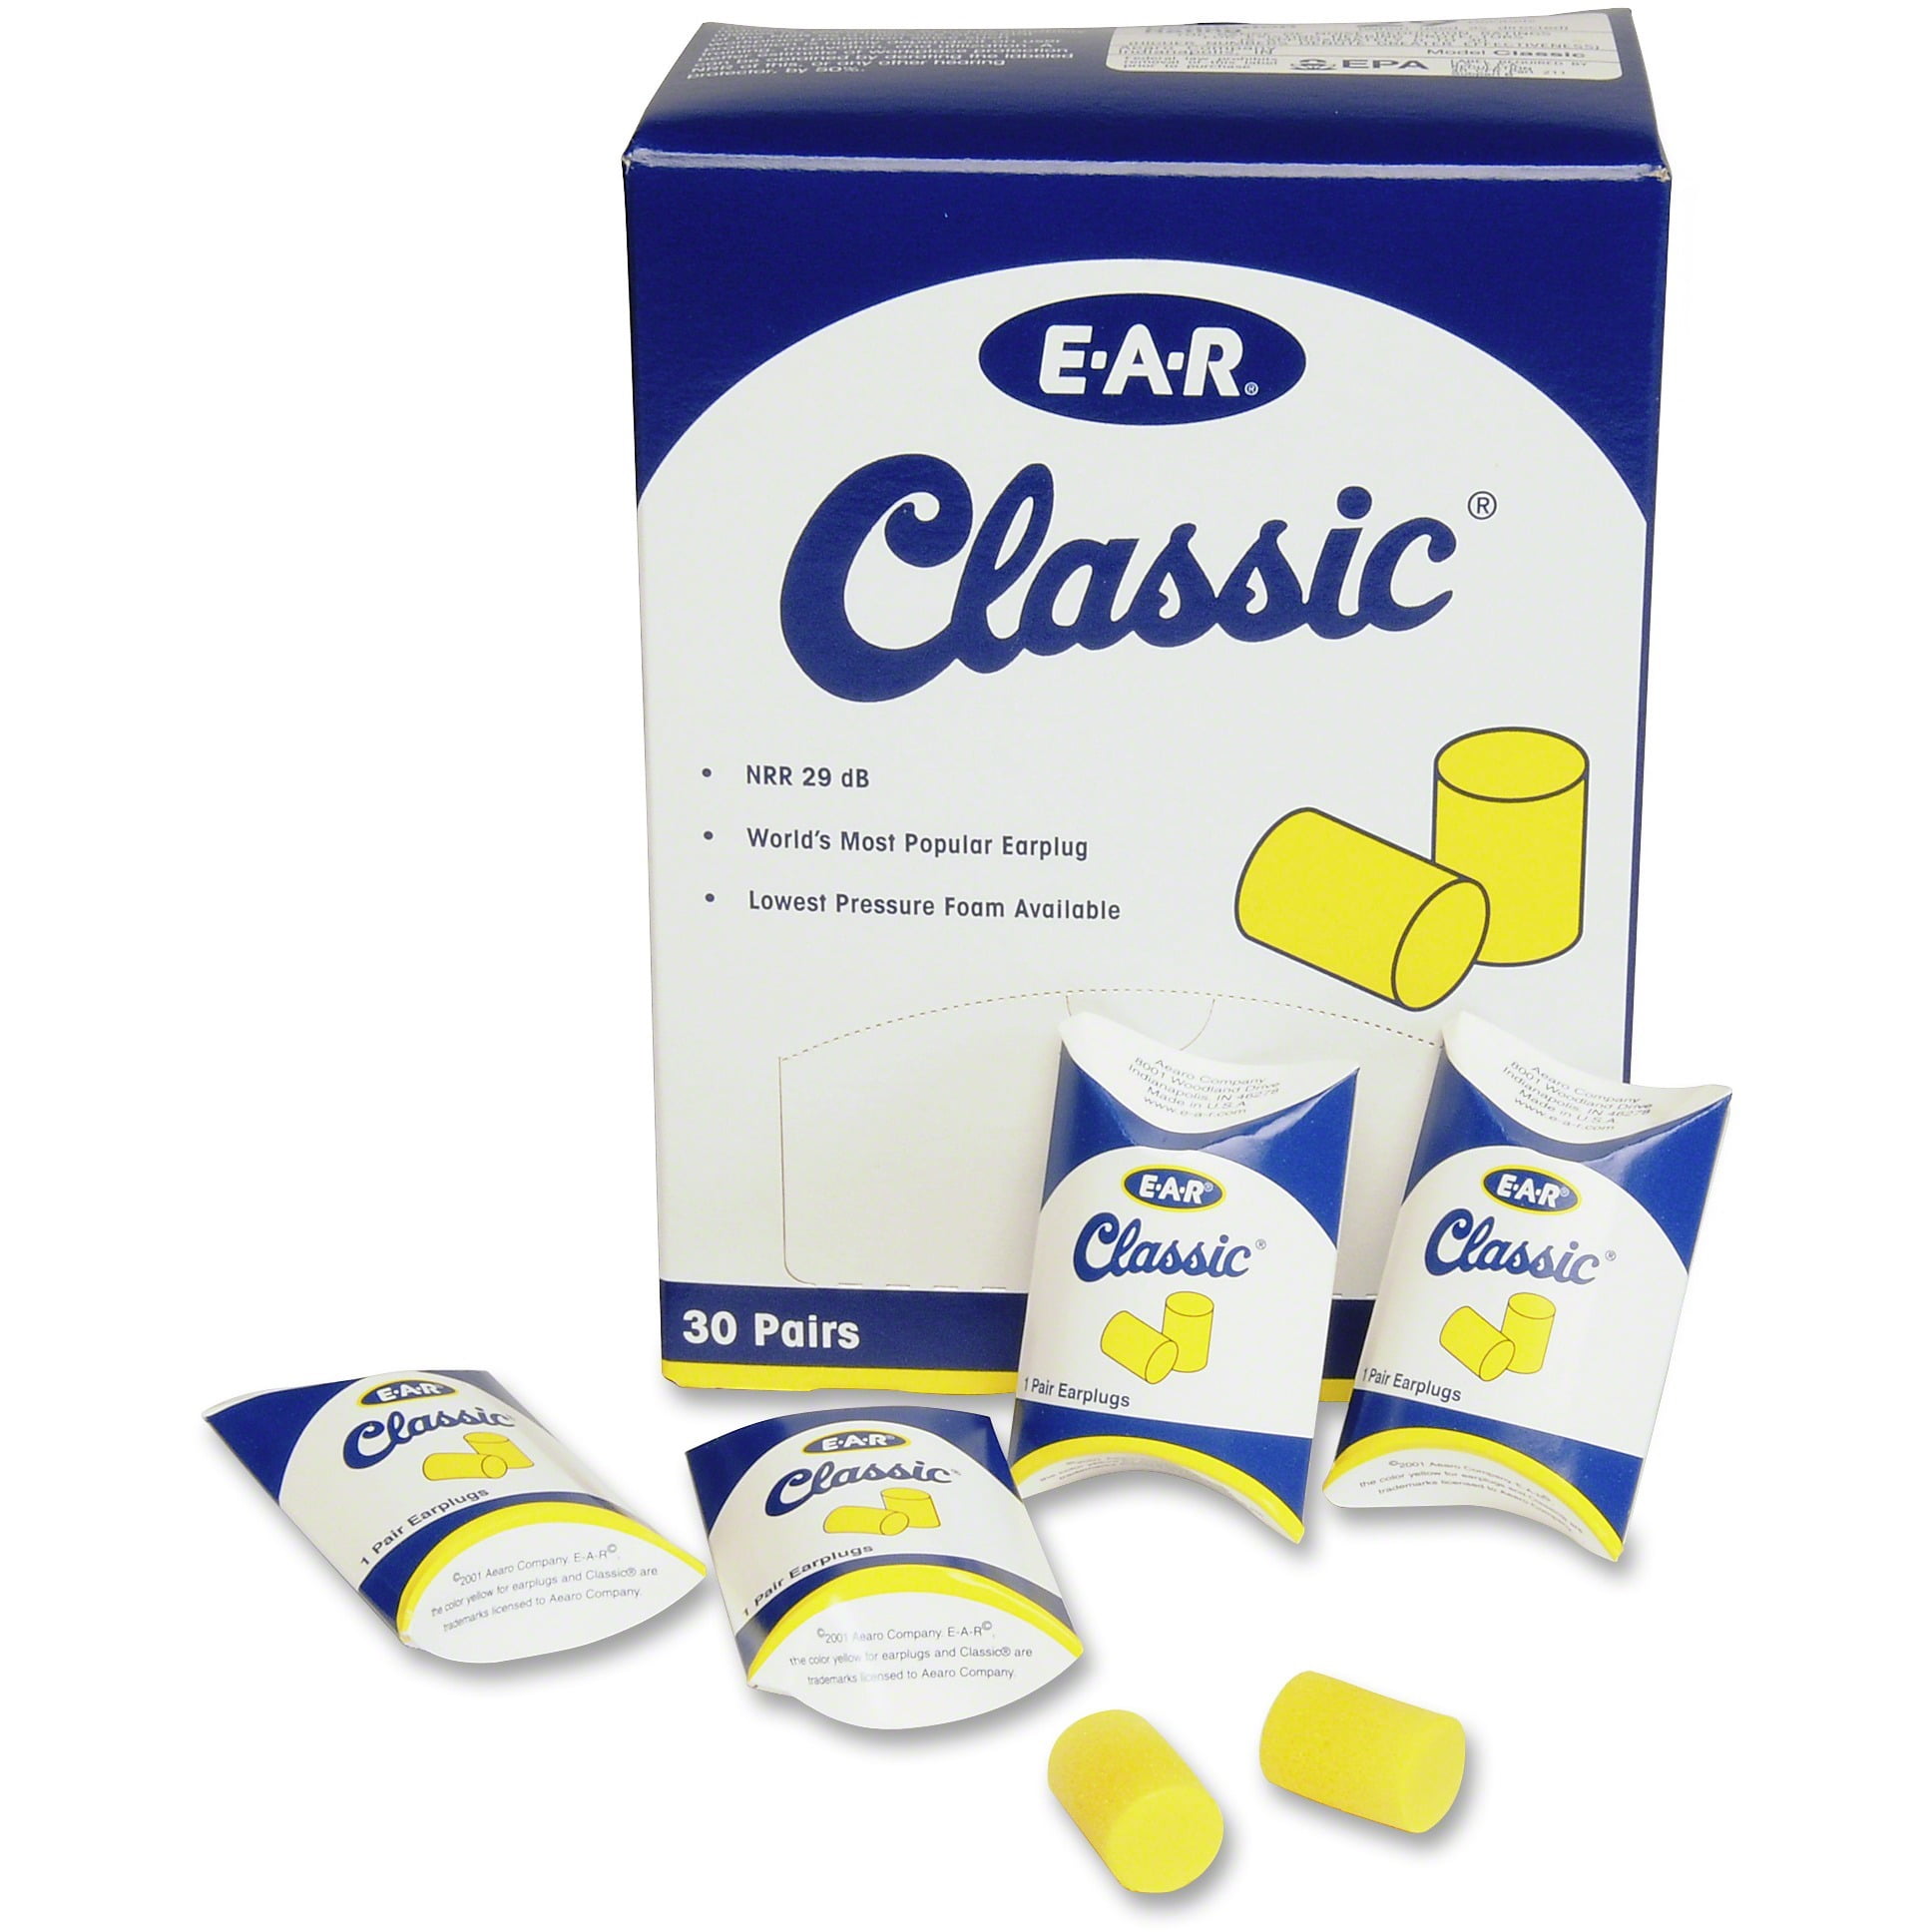 50 pairs 3M Ear Plugs E-A-R Classic Noise Reduction 29dB Yellow Foam Disposable 